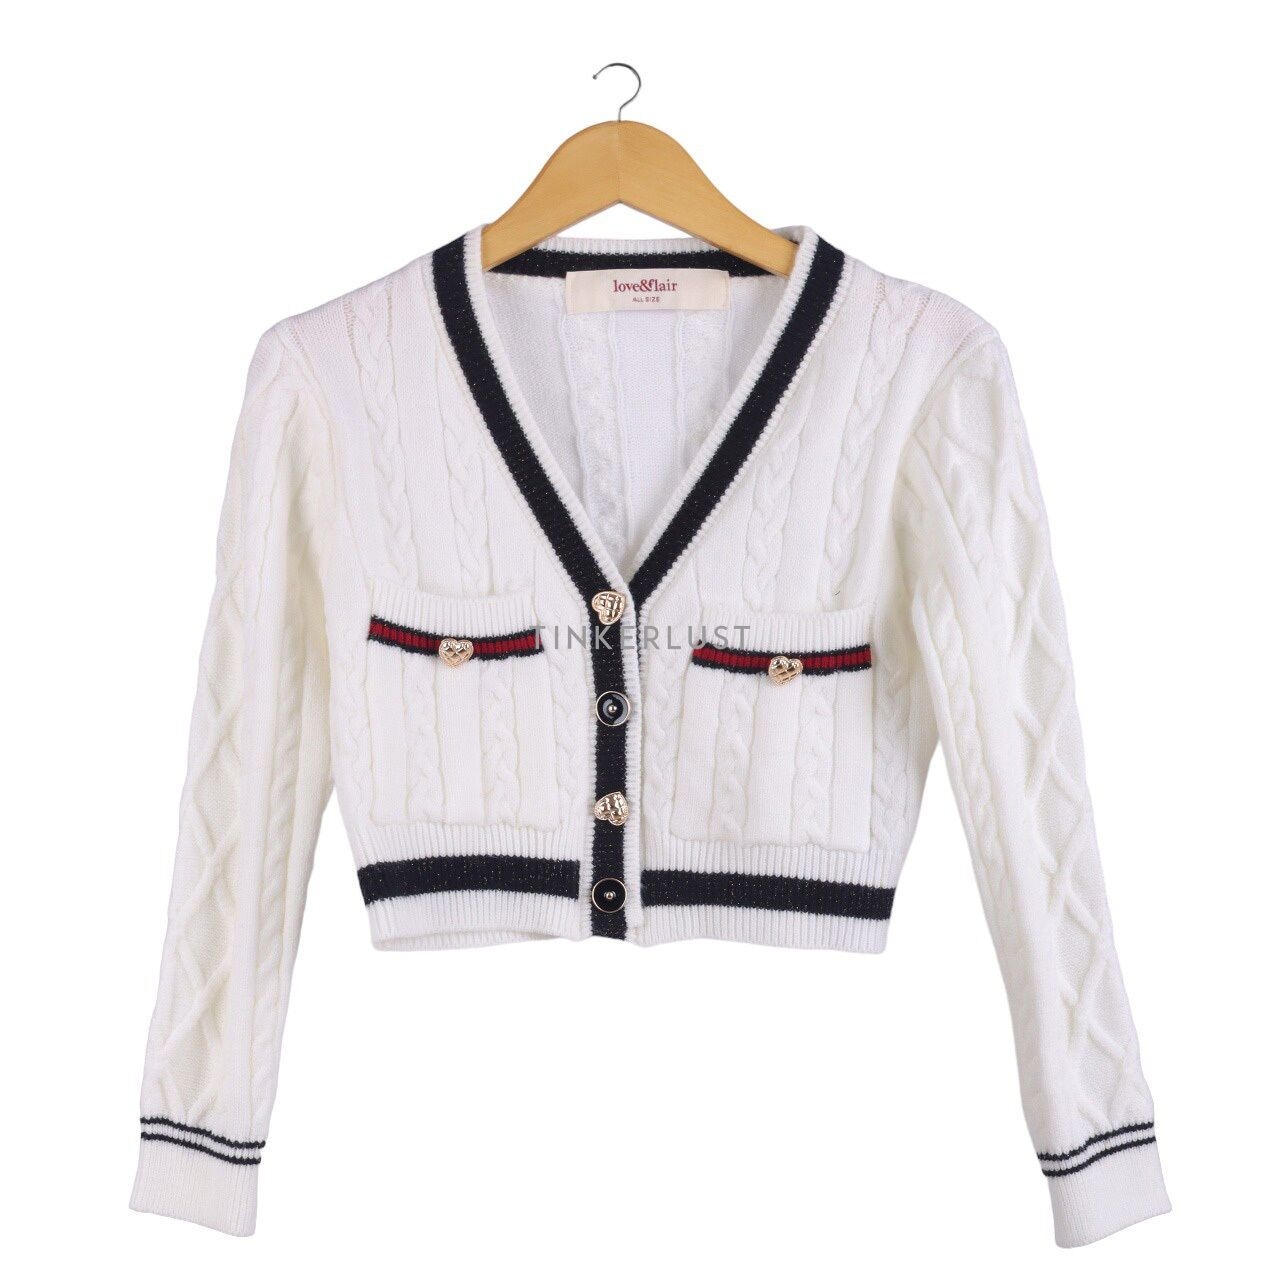 love-and-flair Black & White Cardigan